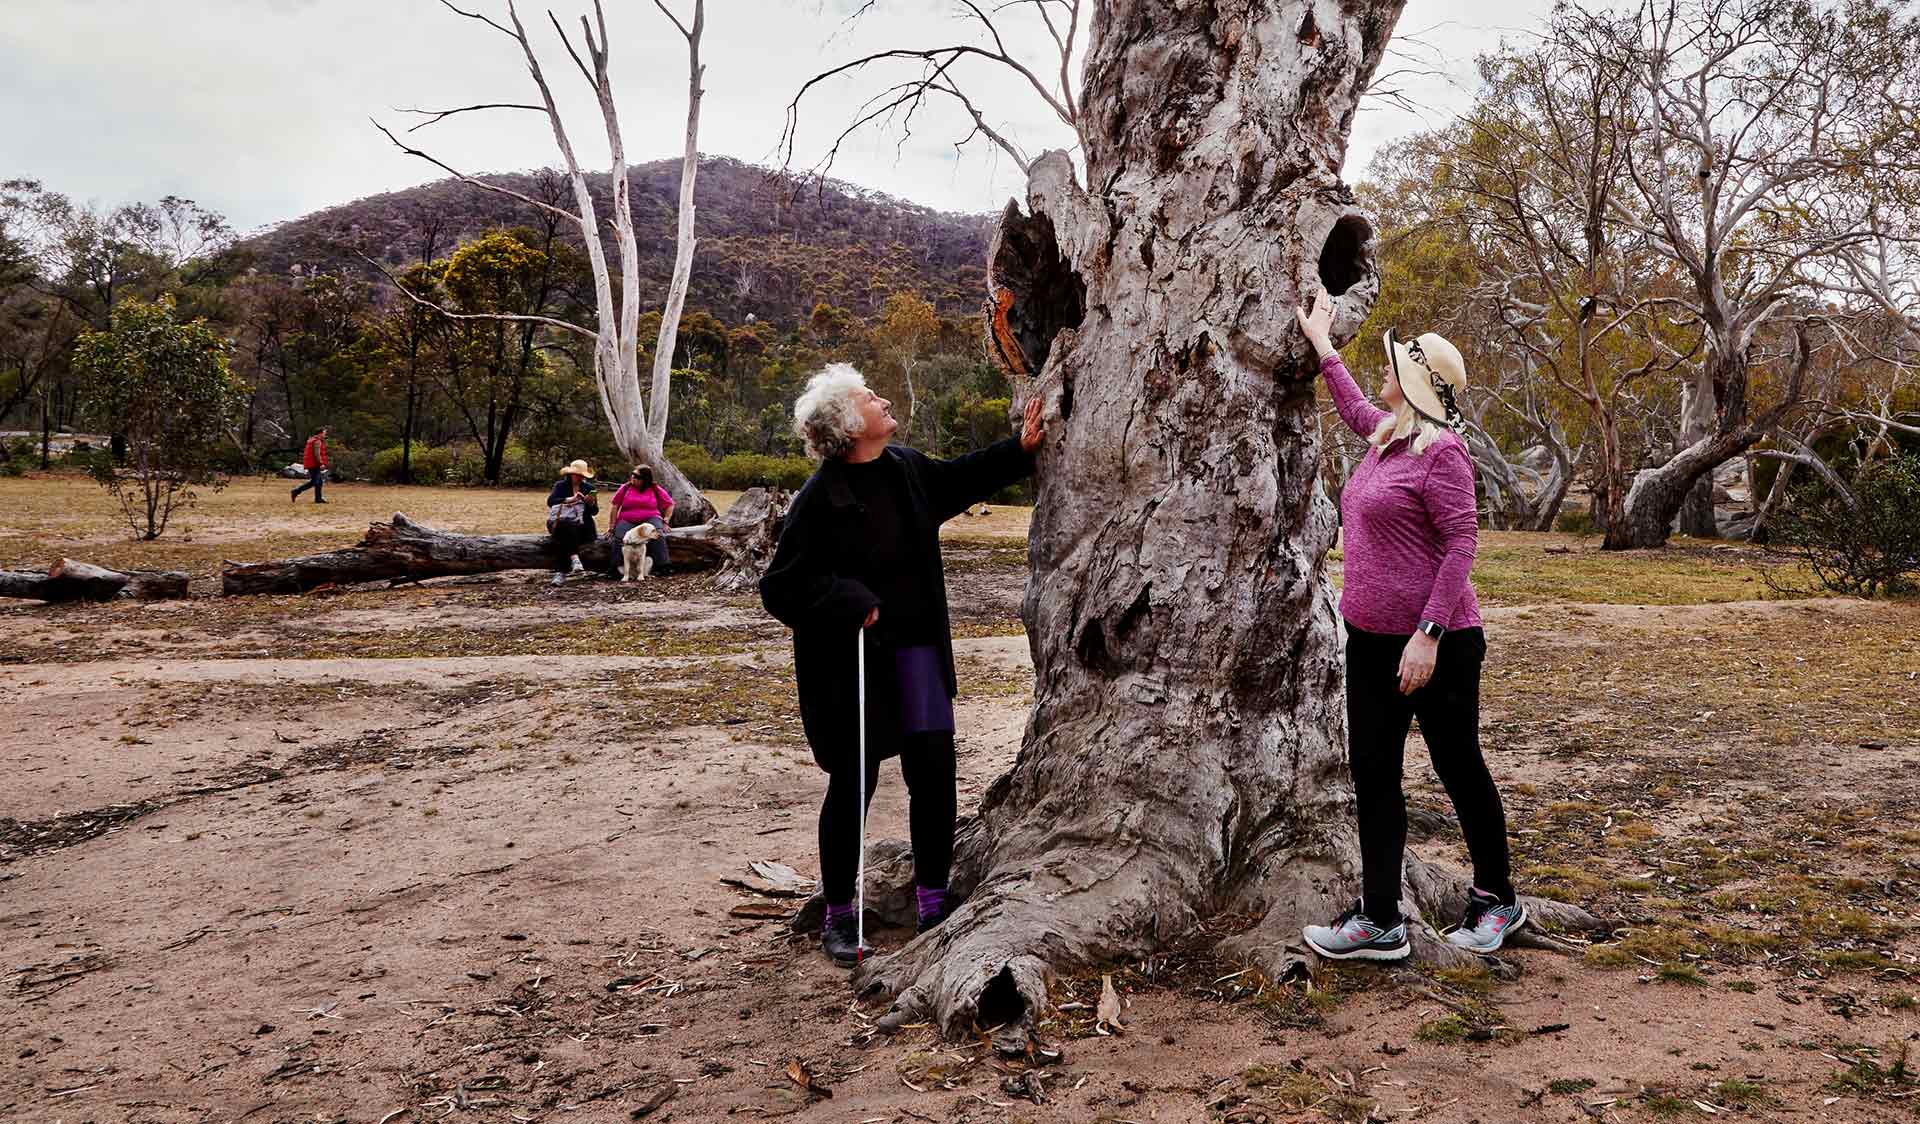 A vision impaired woman and friend inspecting a large, old tree at Valley Picnic Ground